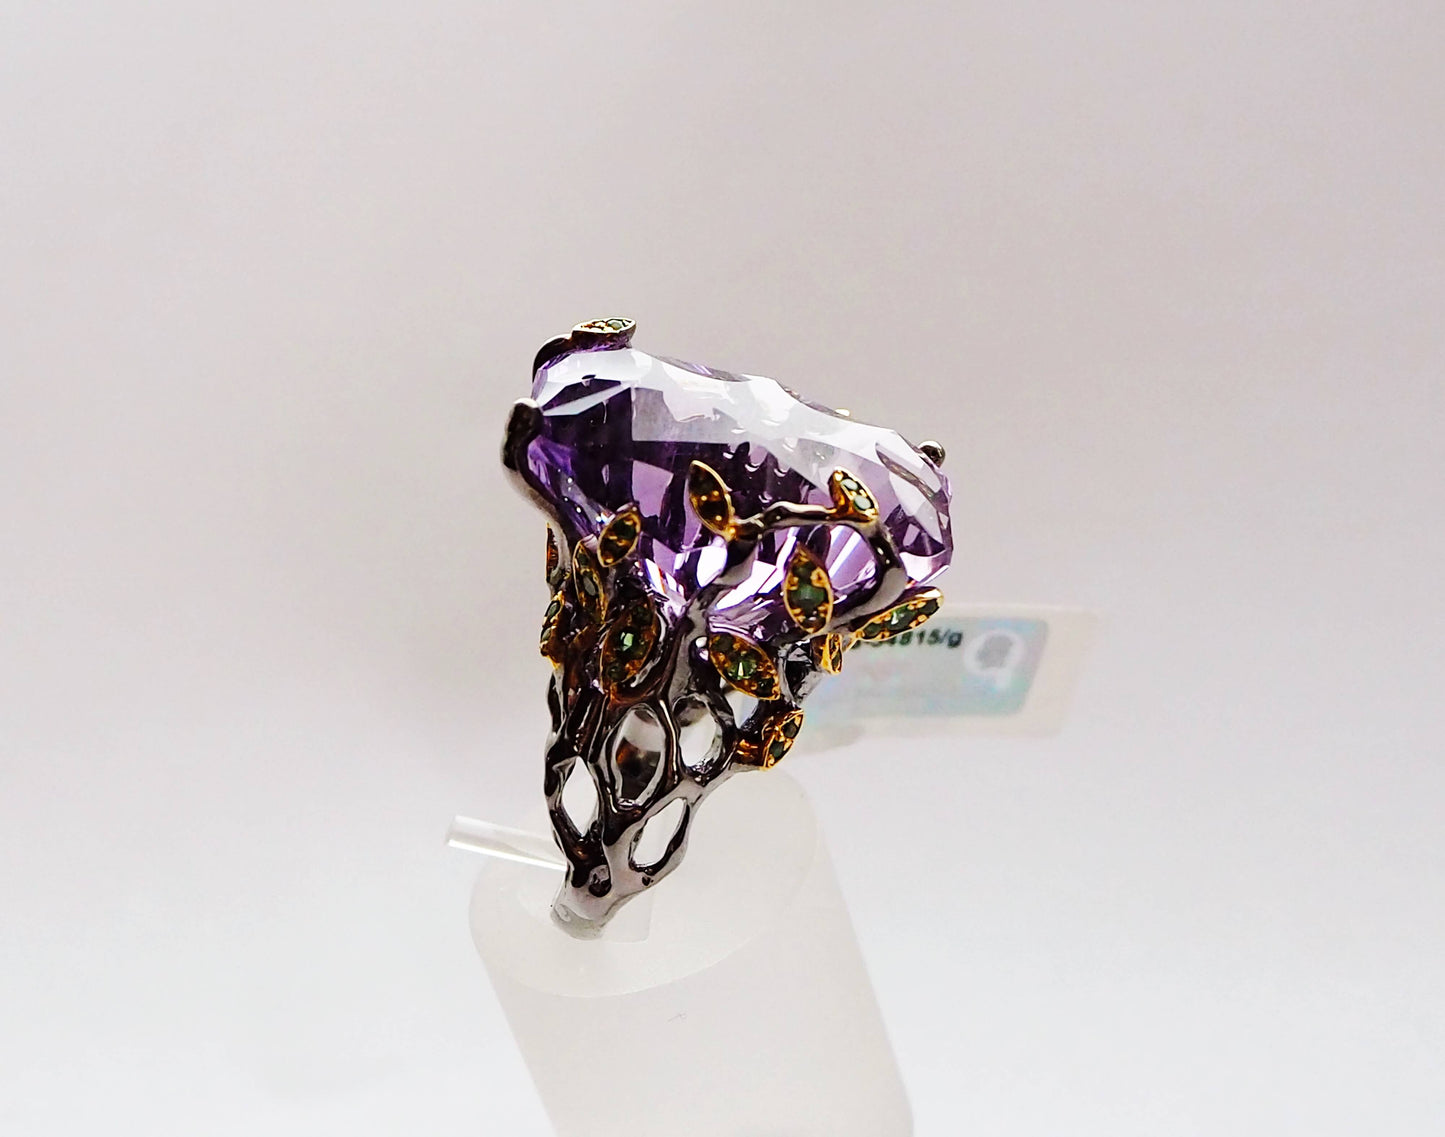 Silver Ring with Amethyst and Tsavorite Garnets